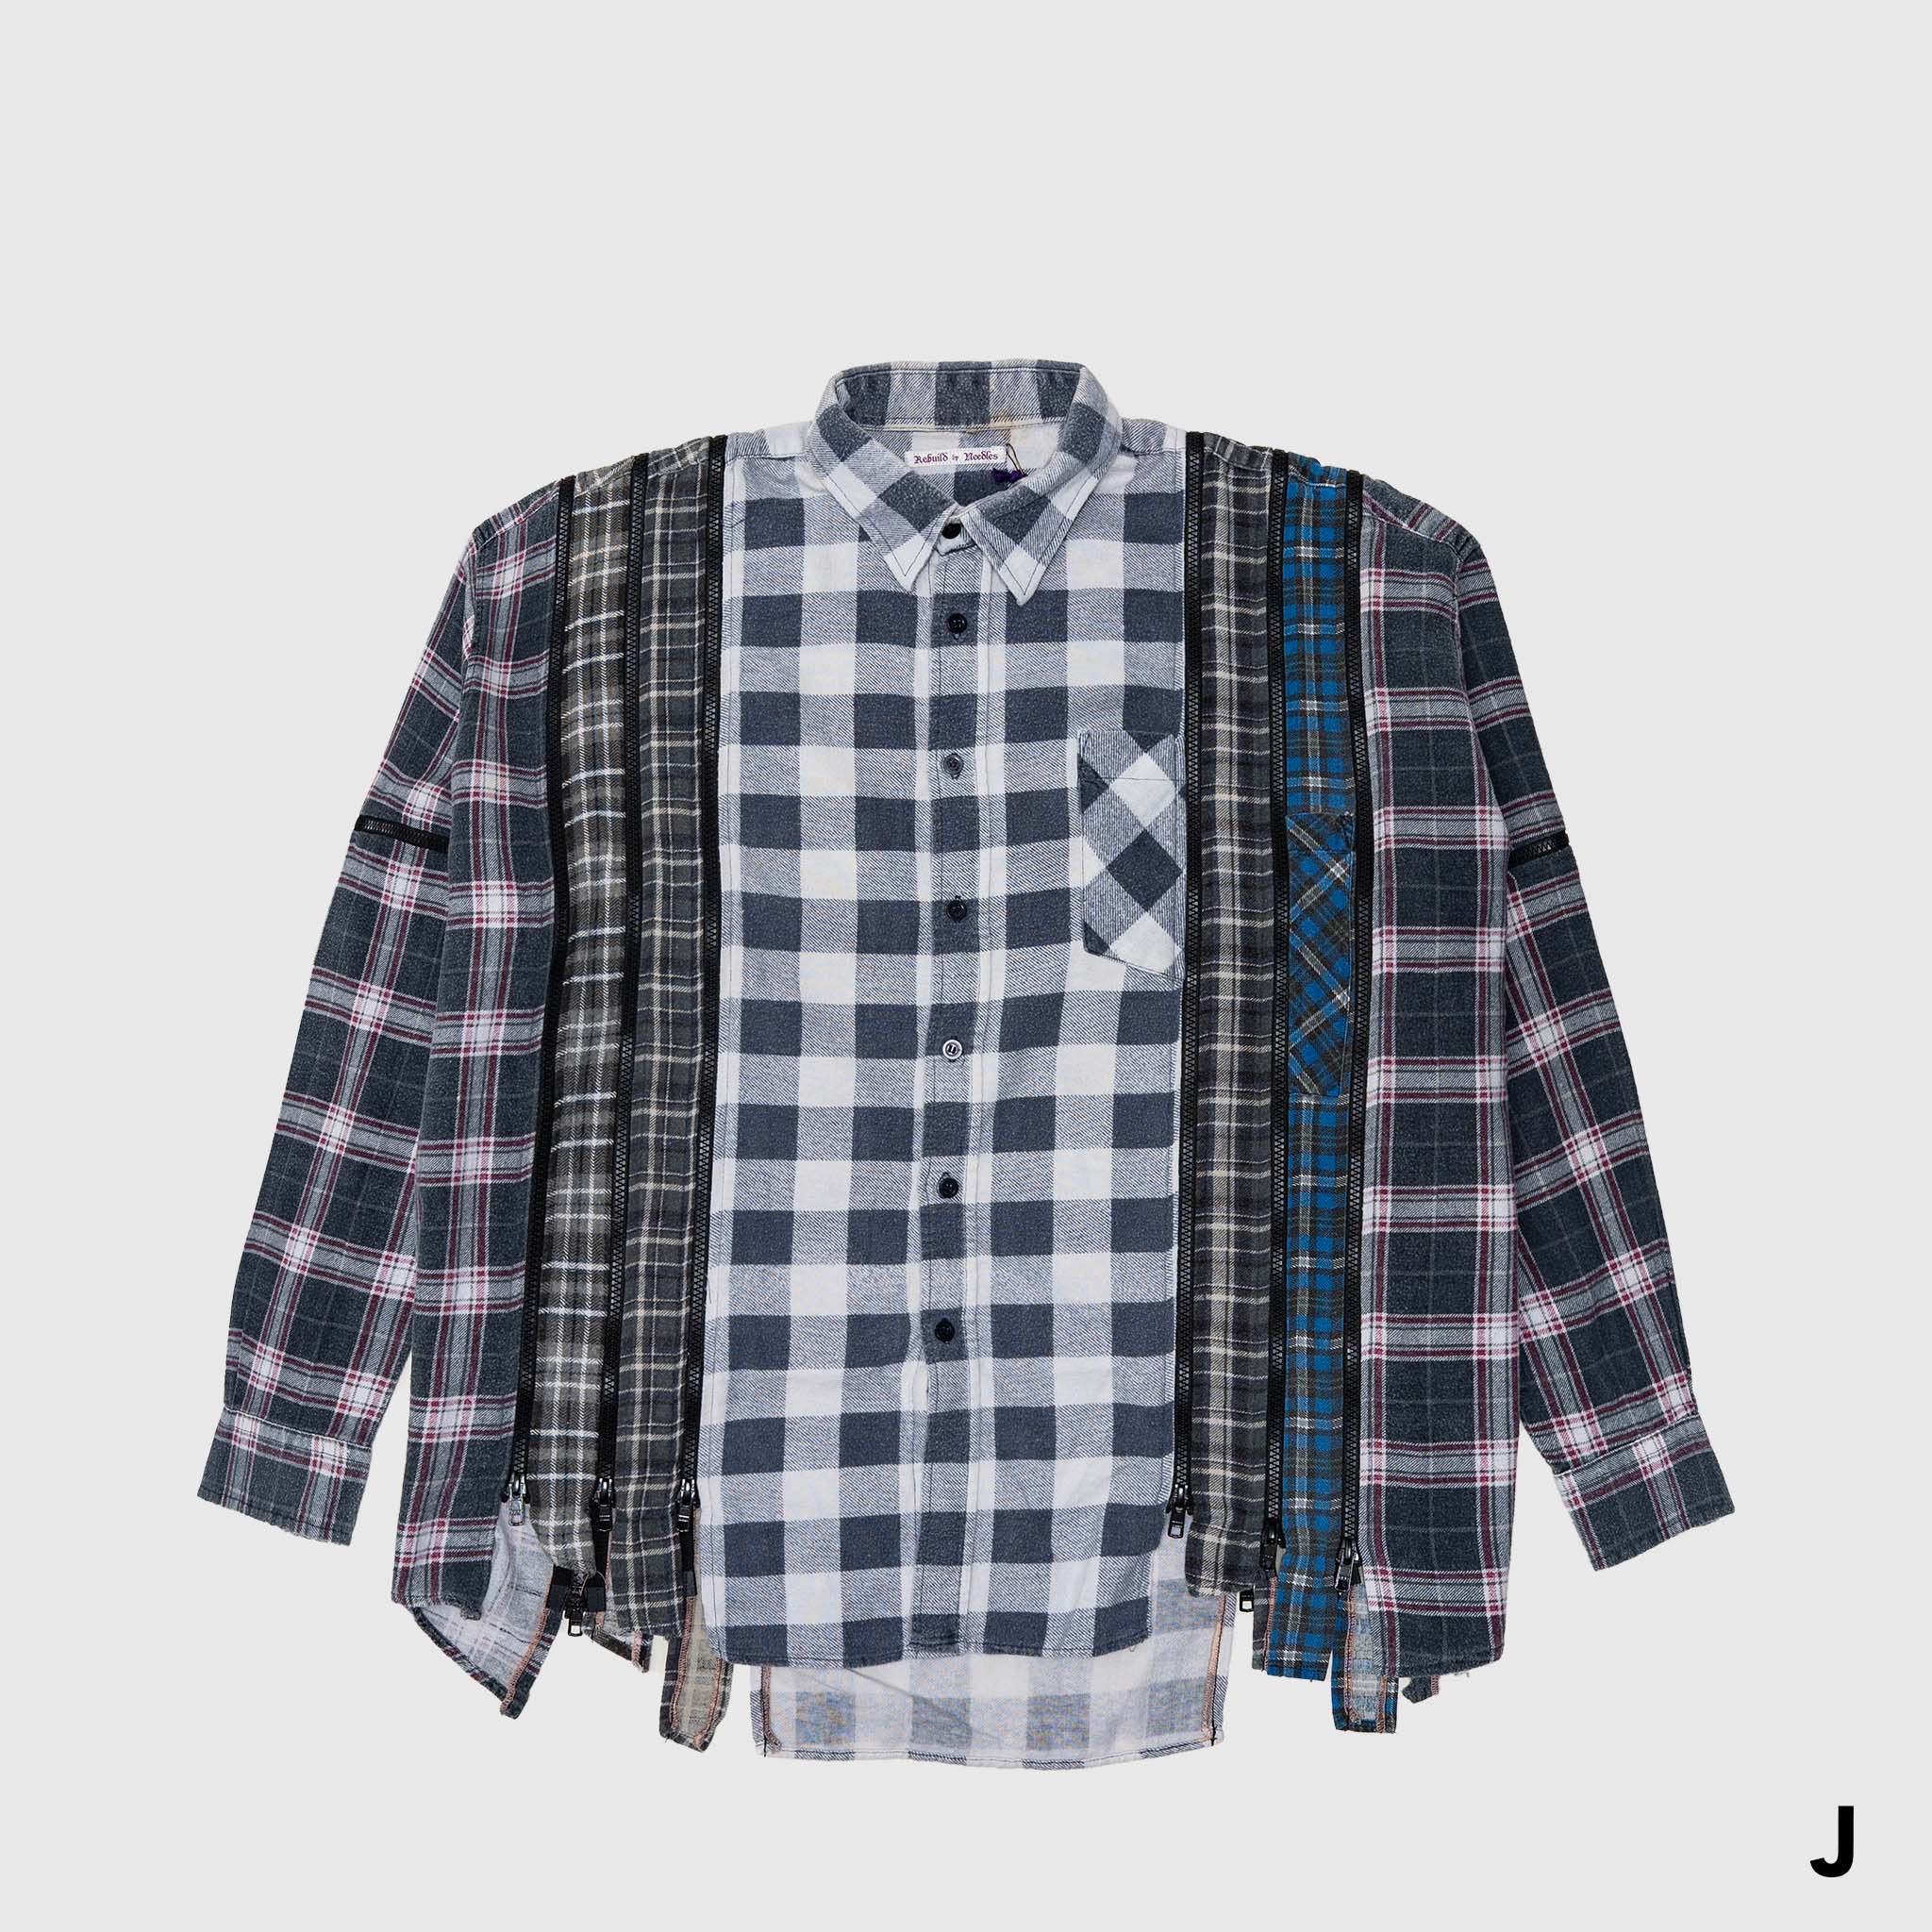 REBUILD BY NEEDLES 7 CUTS ZIPPED WIDE FLANNEL SHIRT